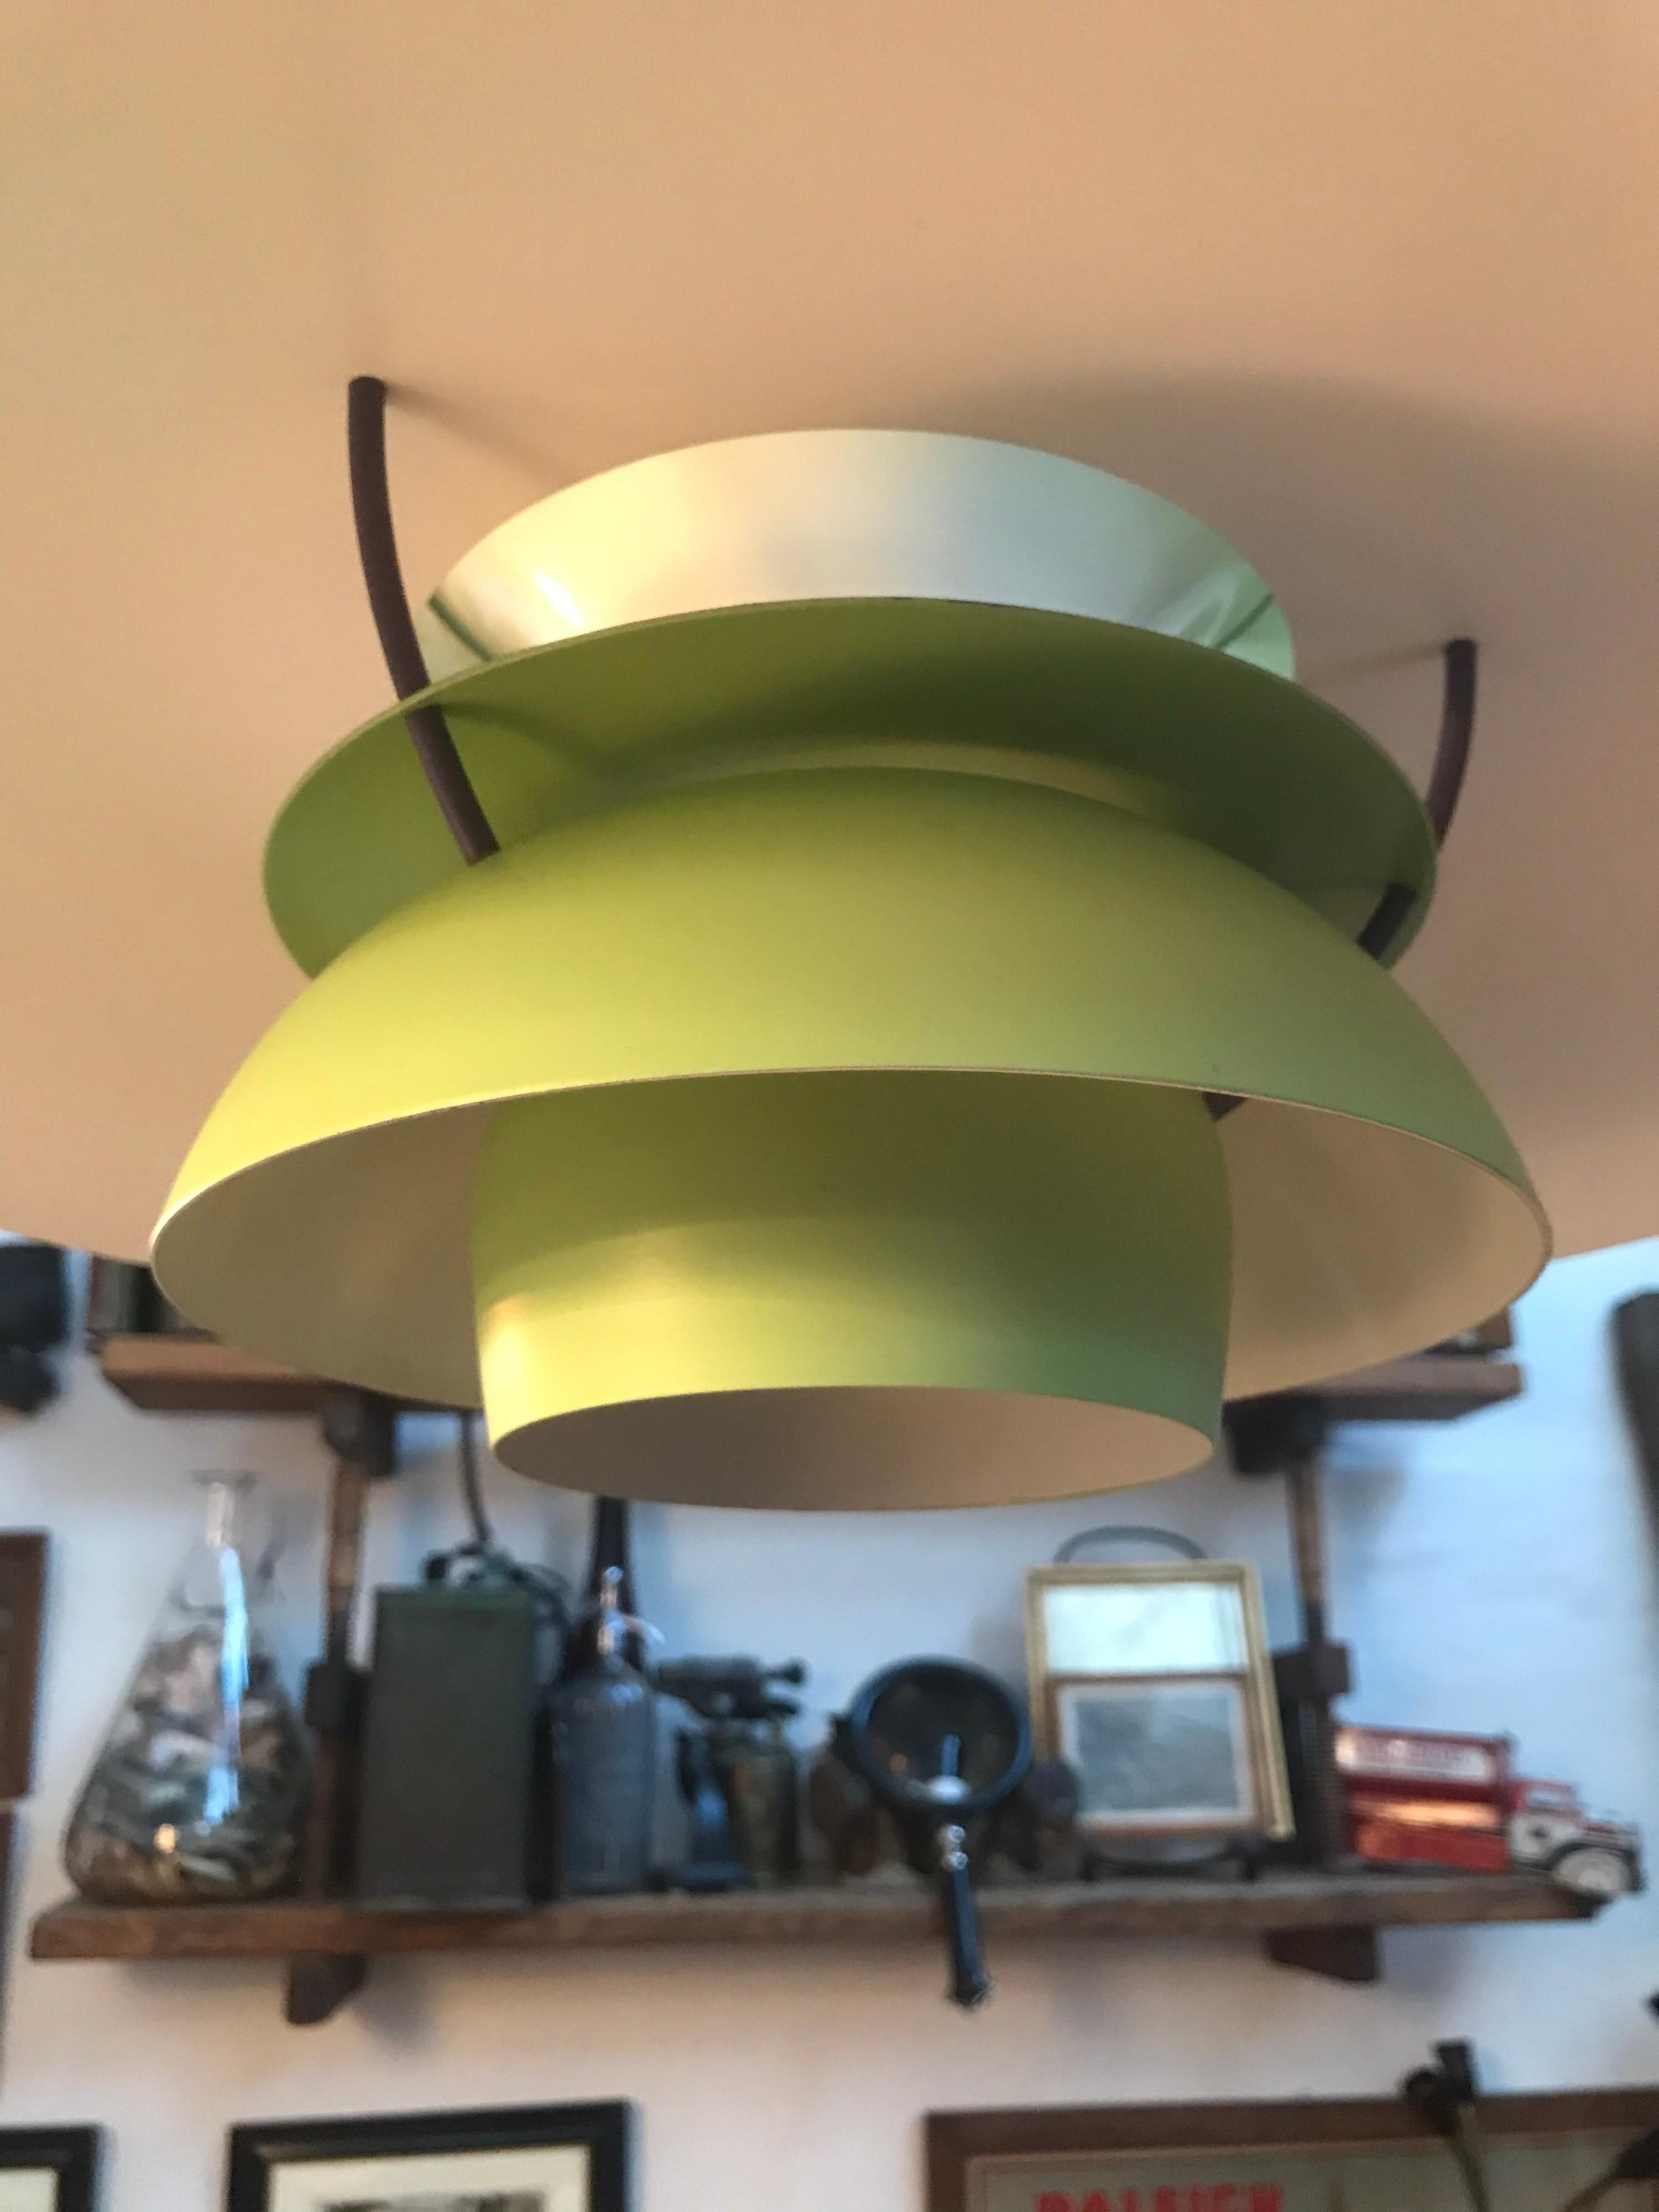 Iconic Vintage Poul Henningsen PH 5 Chandelier Pendant Lamp from the 1970s 2